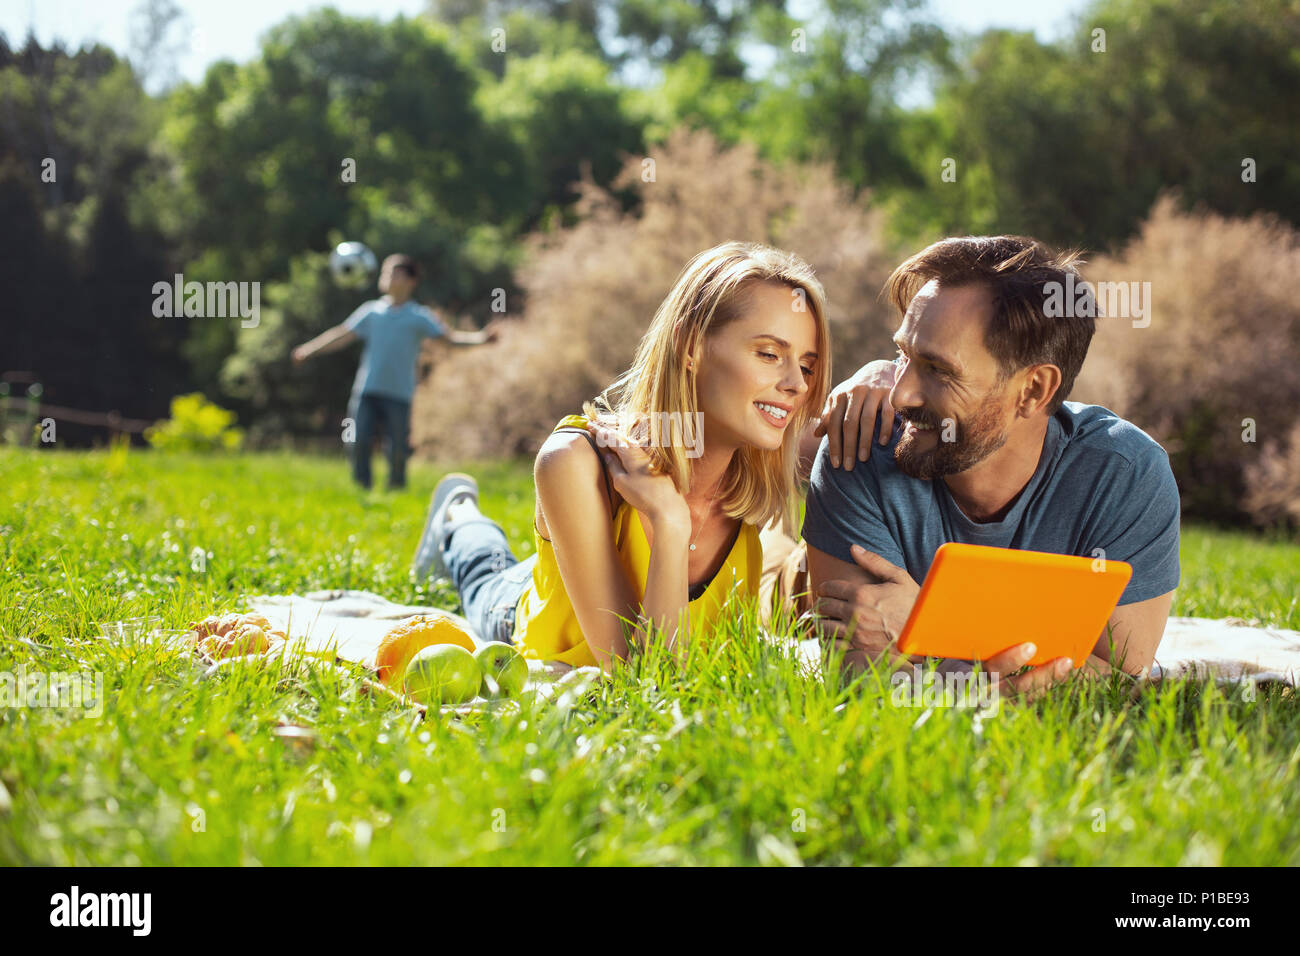 Loving parents relaxing in the open air Stock Photo